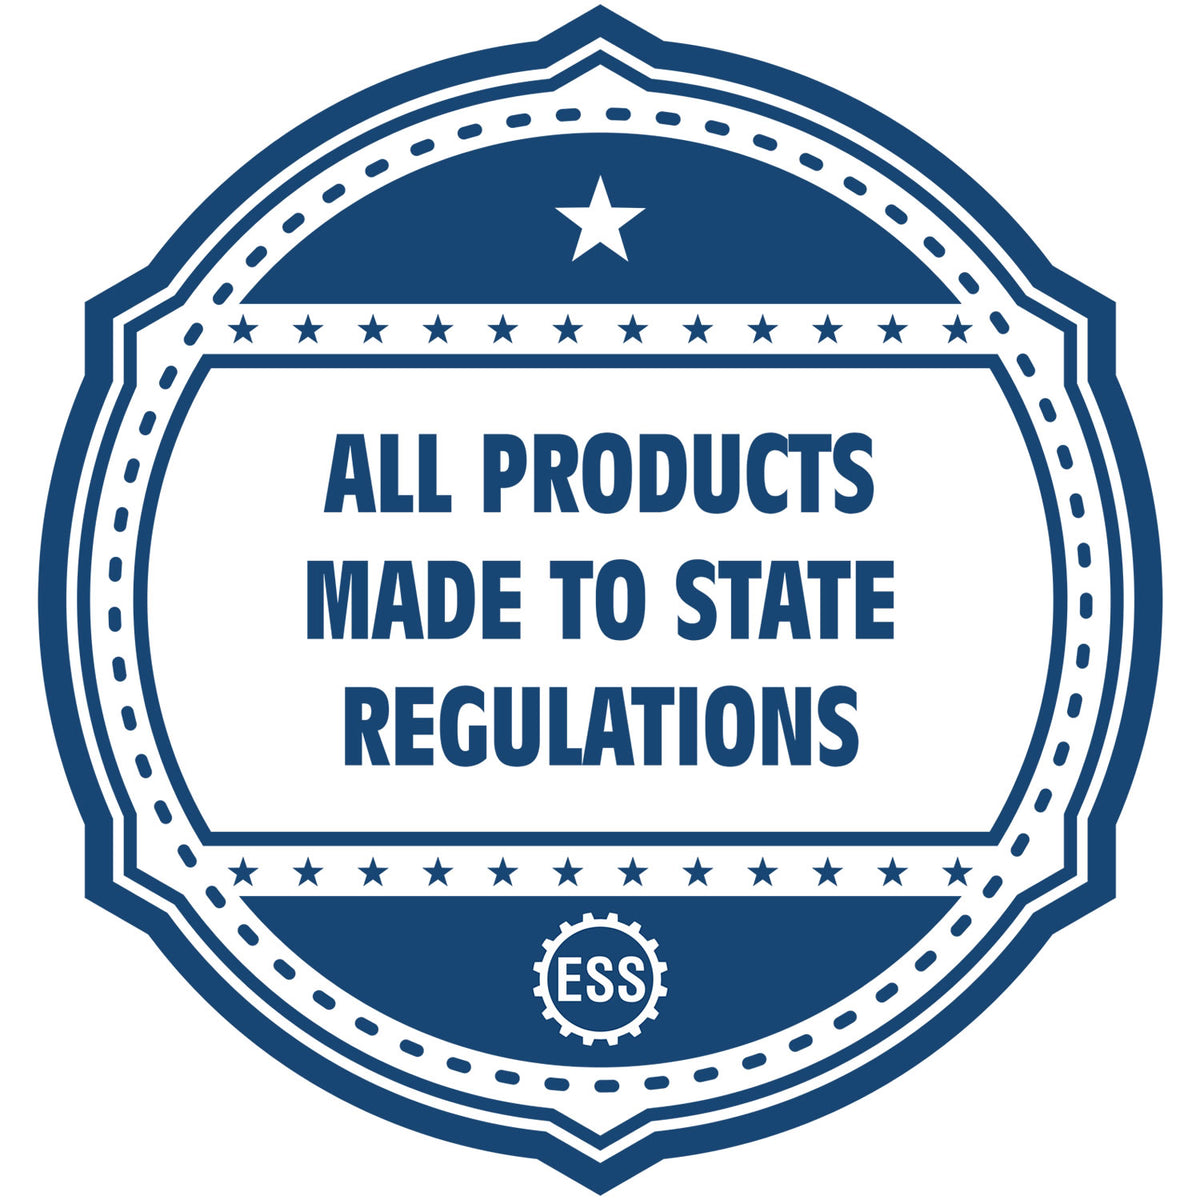 An icon or badge element for the State of Wyoming Architectural Seal Embosser showing that this product is made in compliance with state regulations.